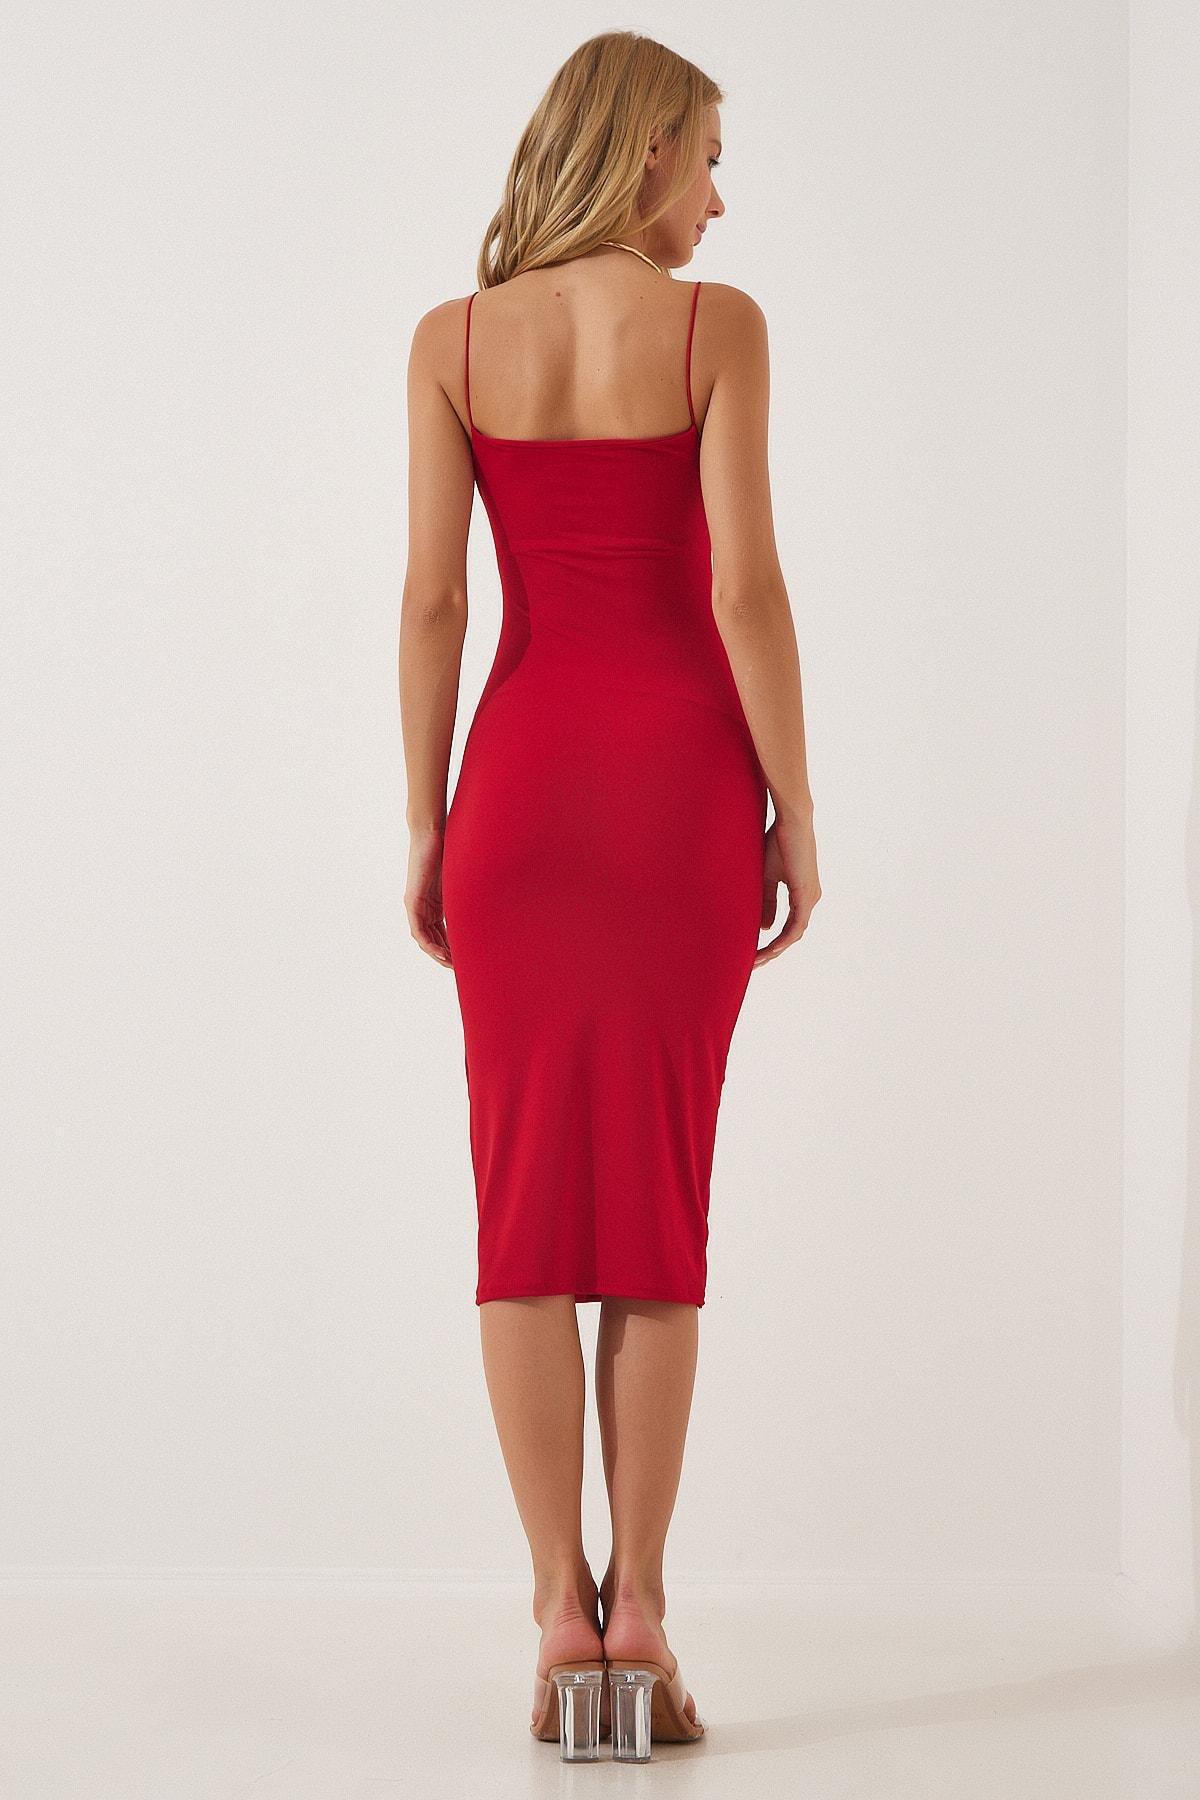 Happiness Istanbul - Red Bodycon Dress